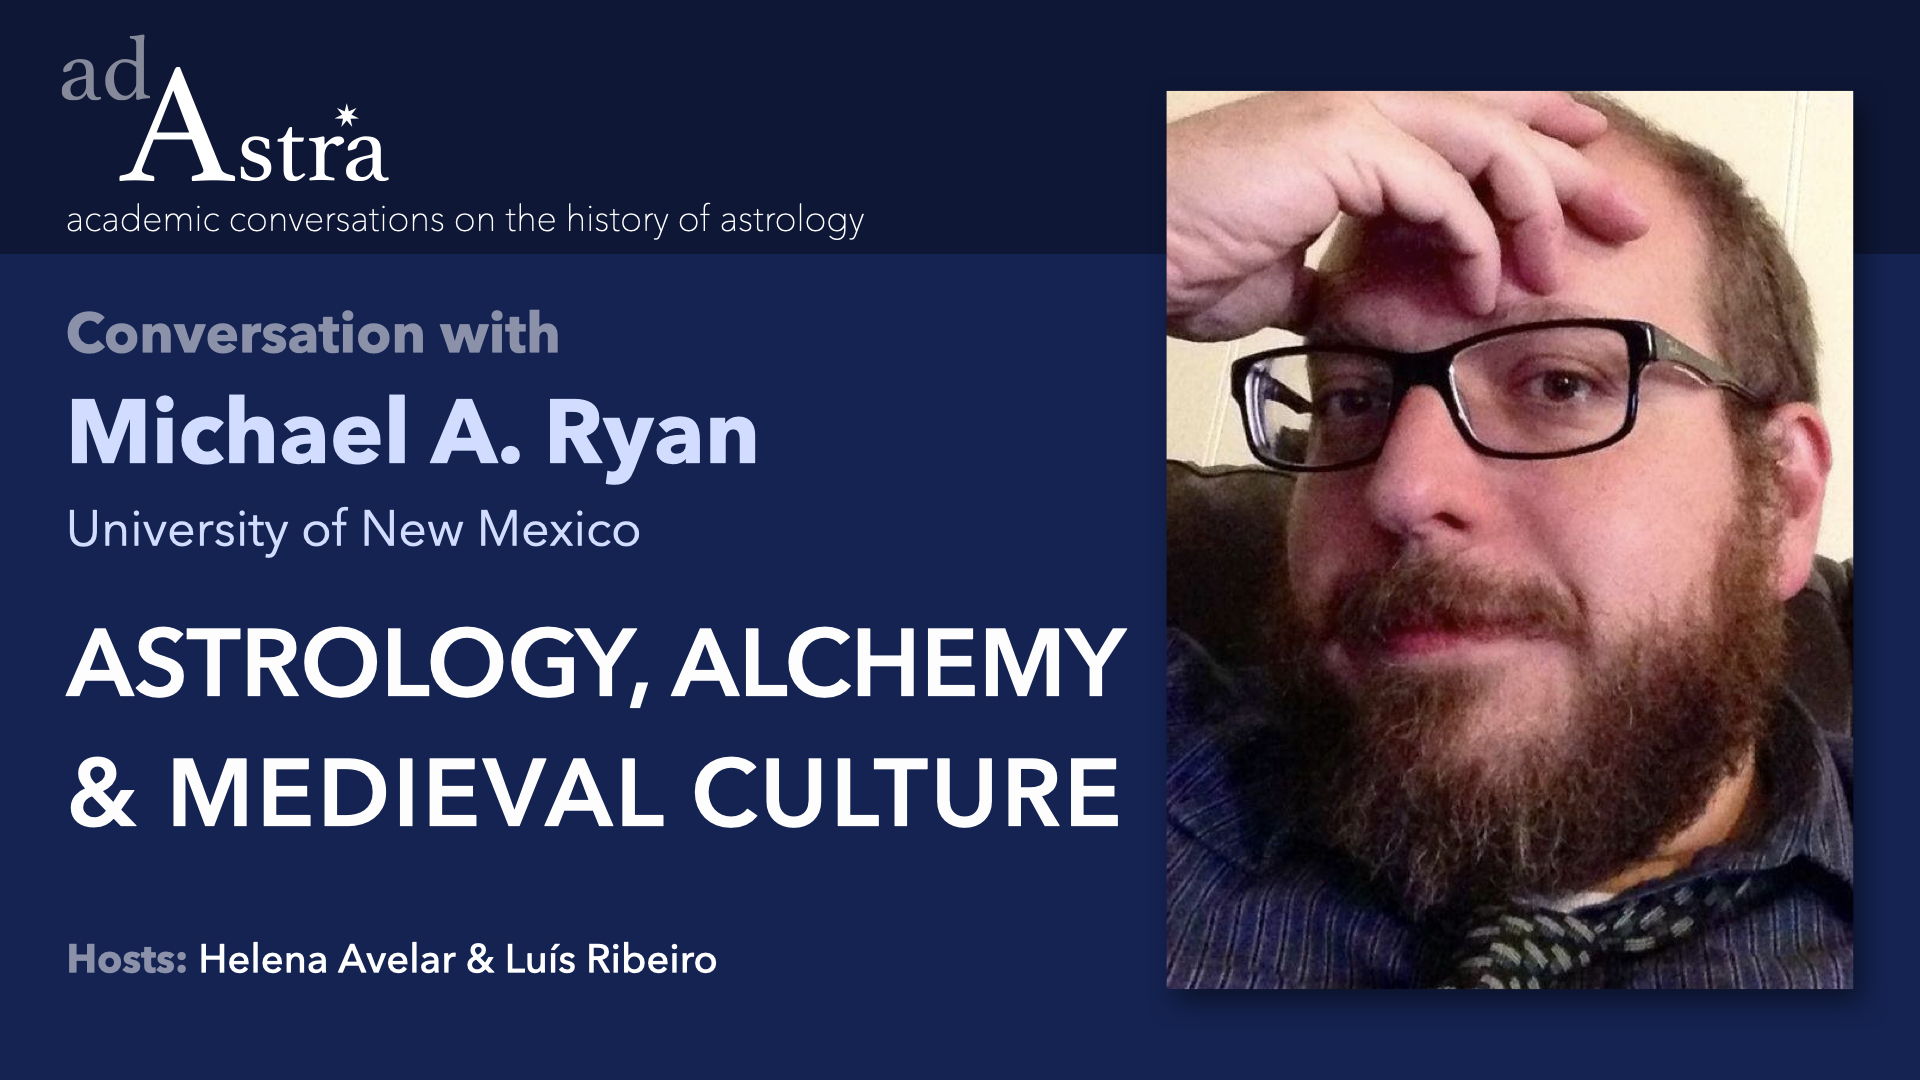 Astrology, Alchemy and Medieval Culture with Michael A. Ryan